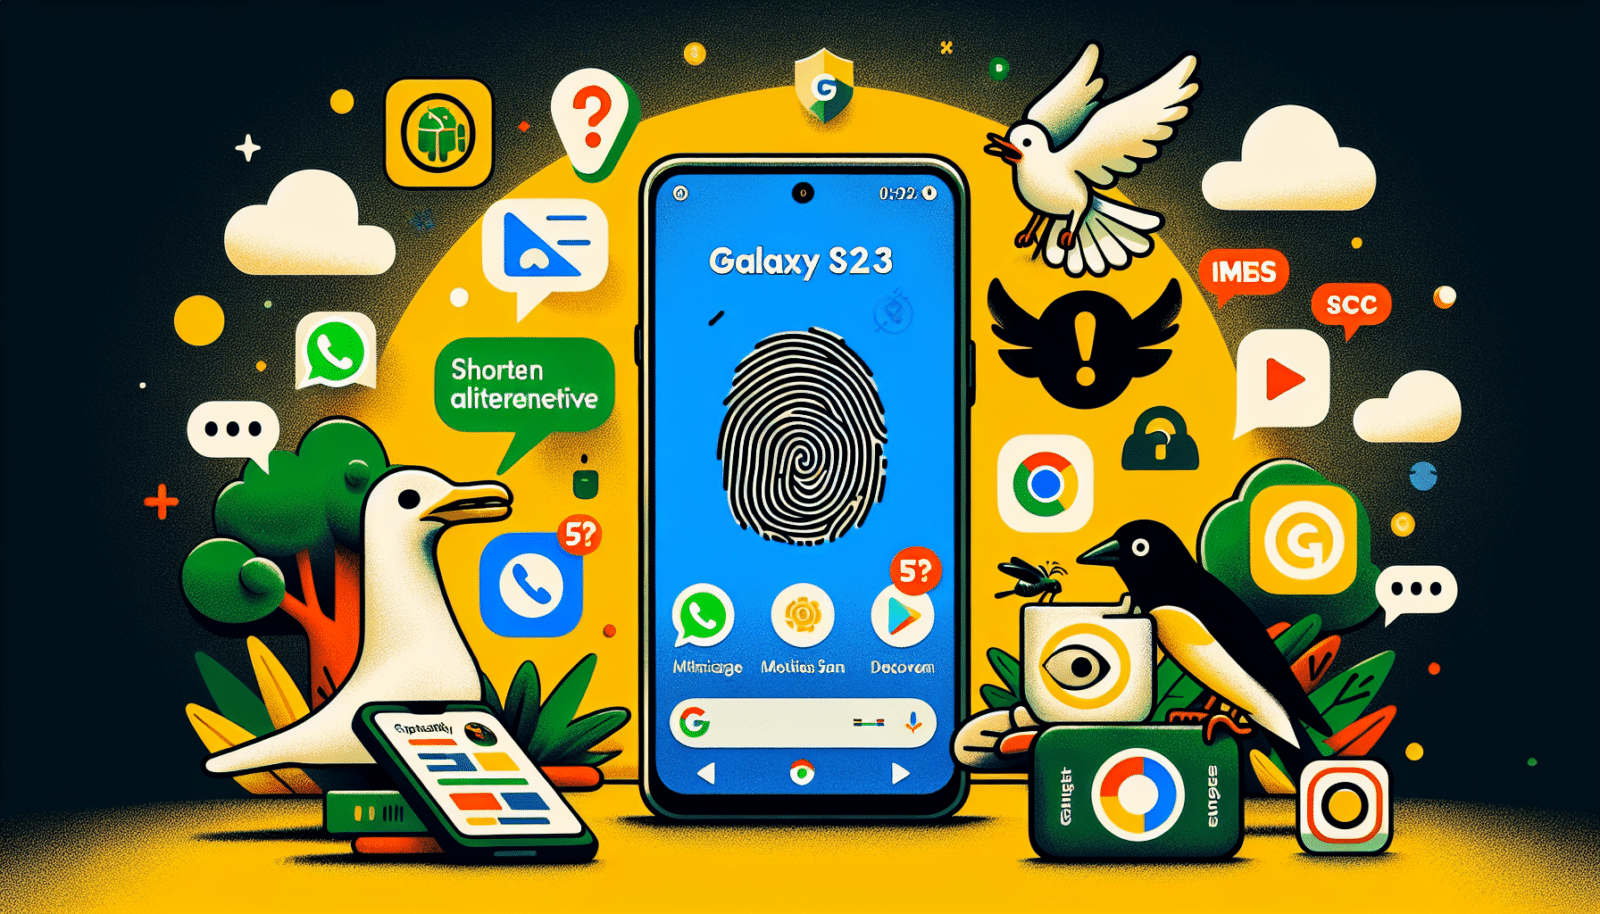 Android Daily News : Correctifs, WhatsApp et anti-spam RCS